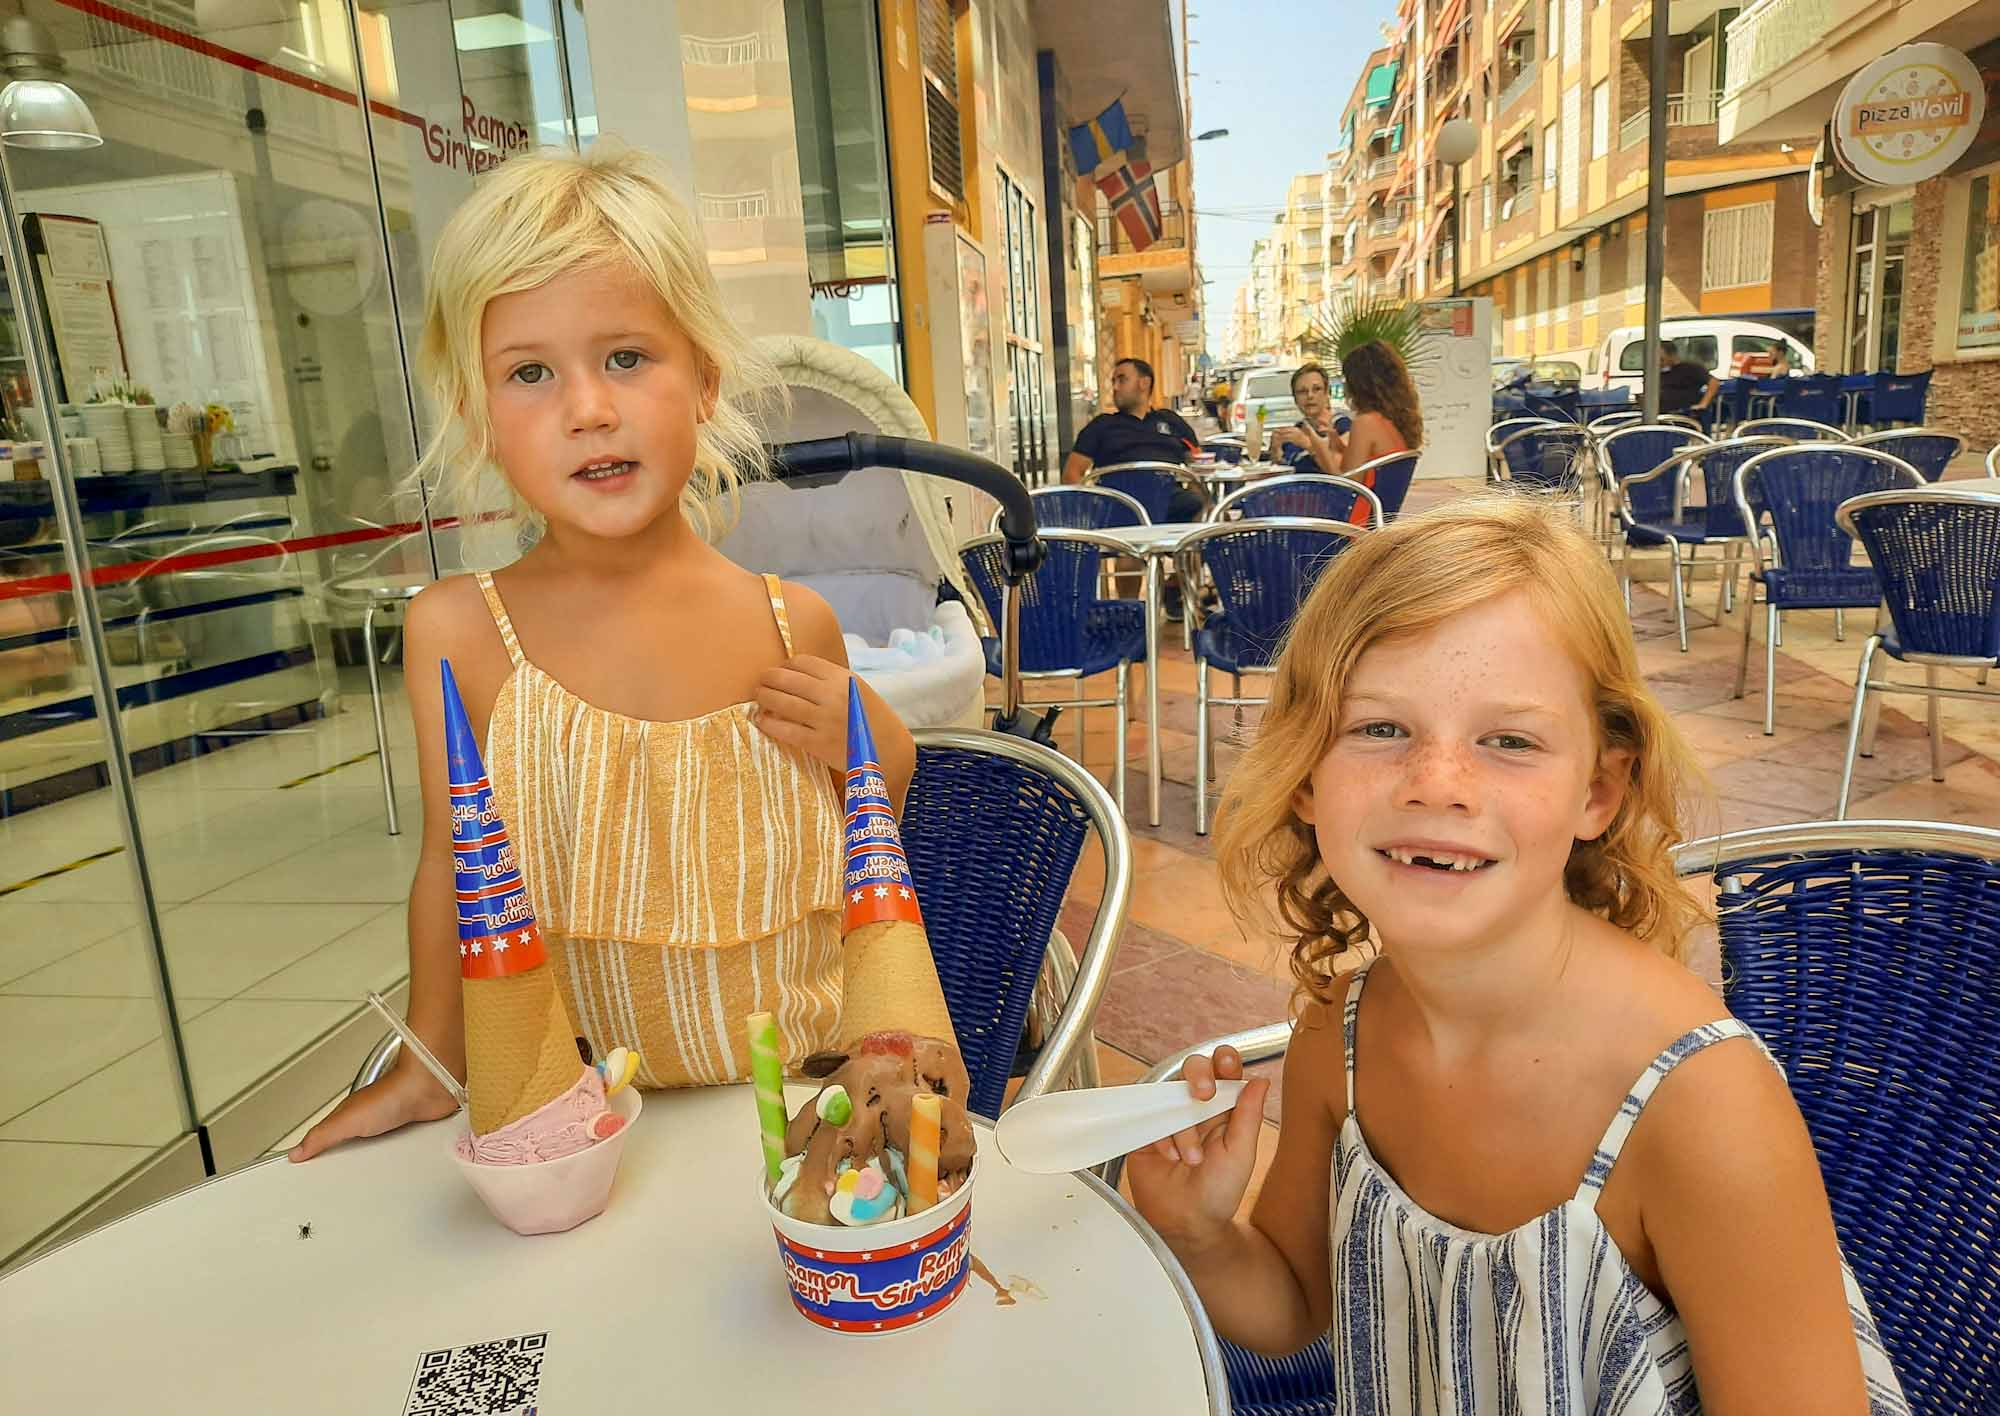 2 young girls eating large ice creams at an outdoor table